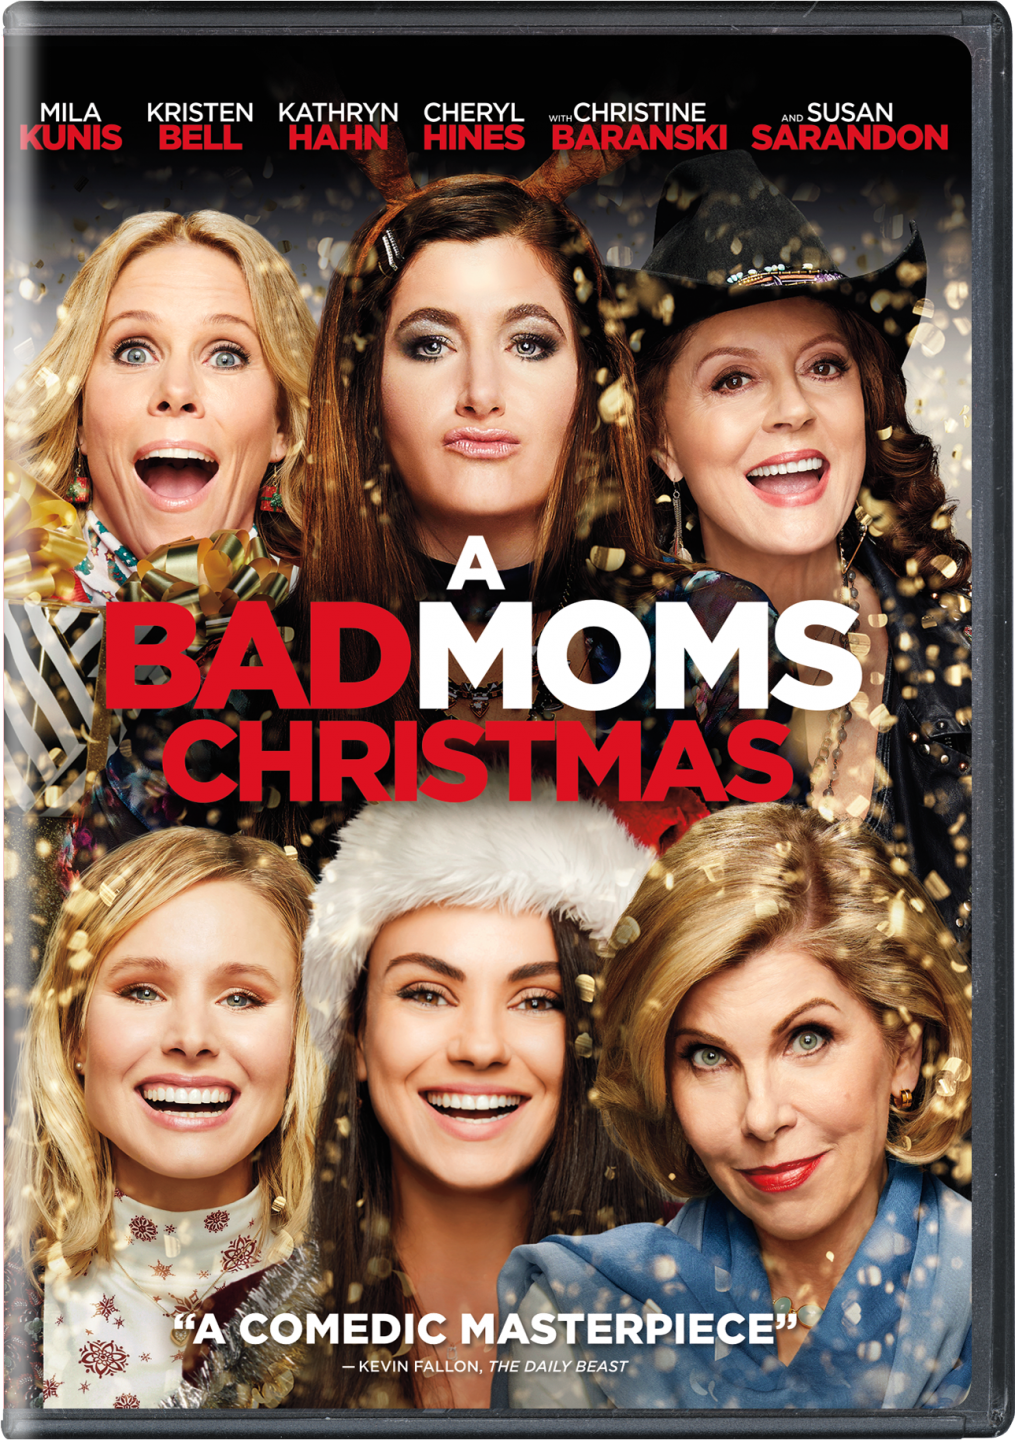 A Bad Moms Christmas DVD cover (Universal Pictures Home Entertainment)